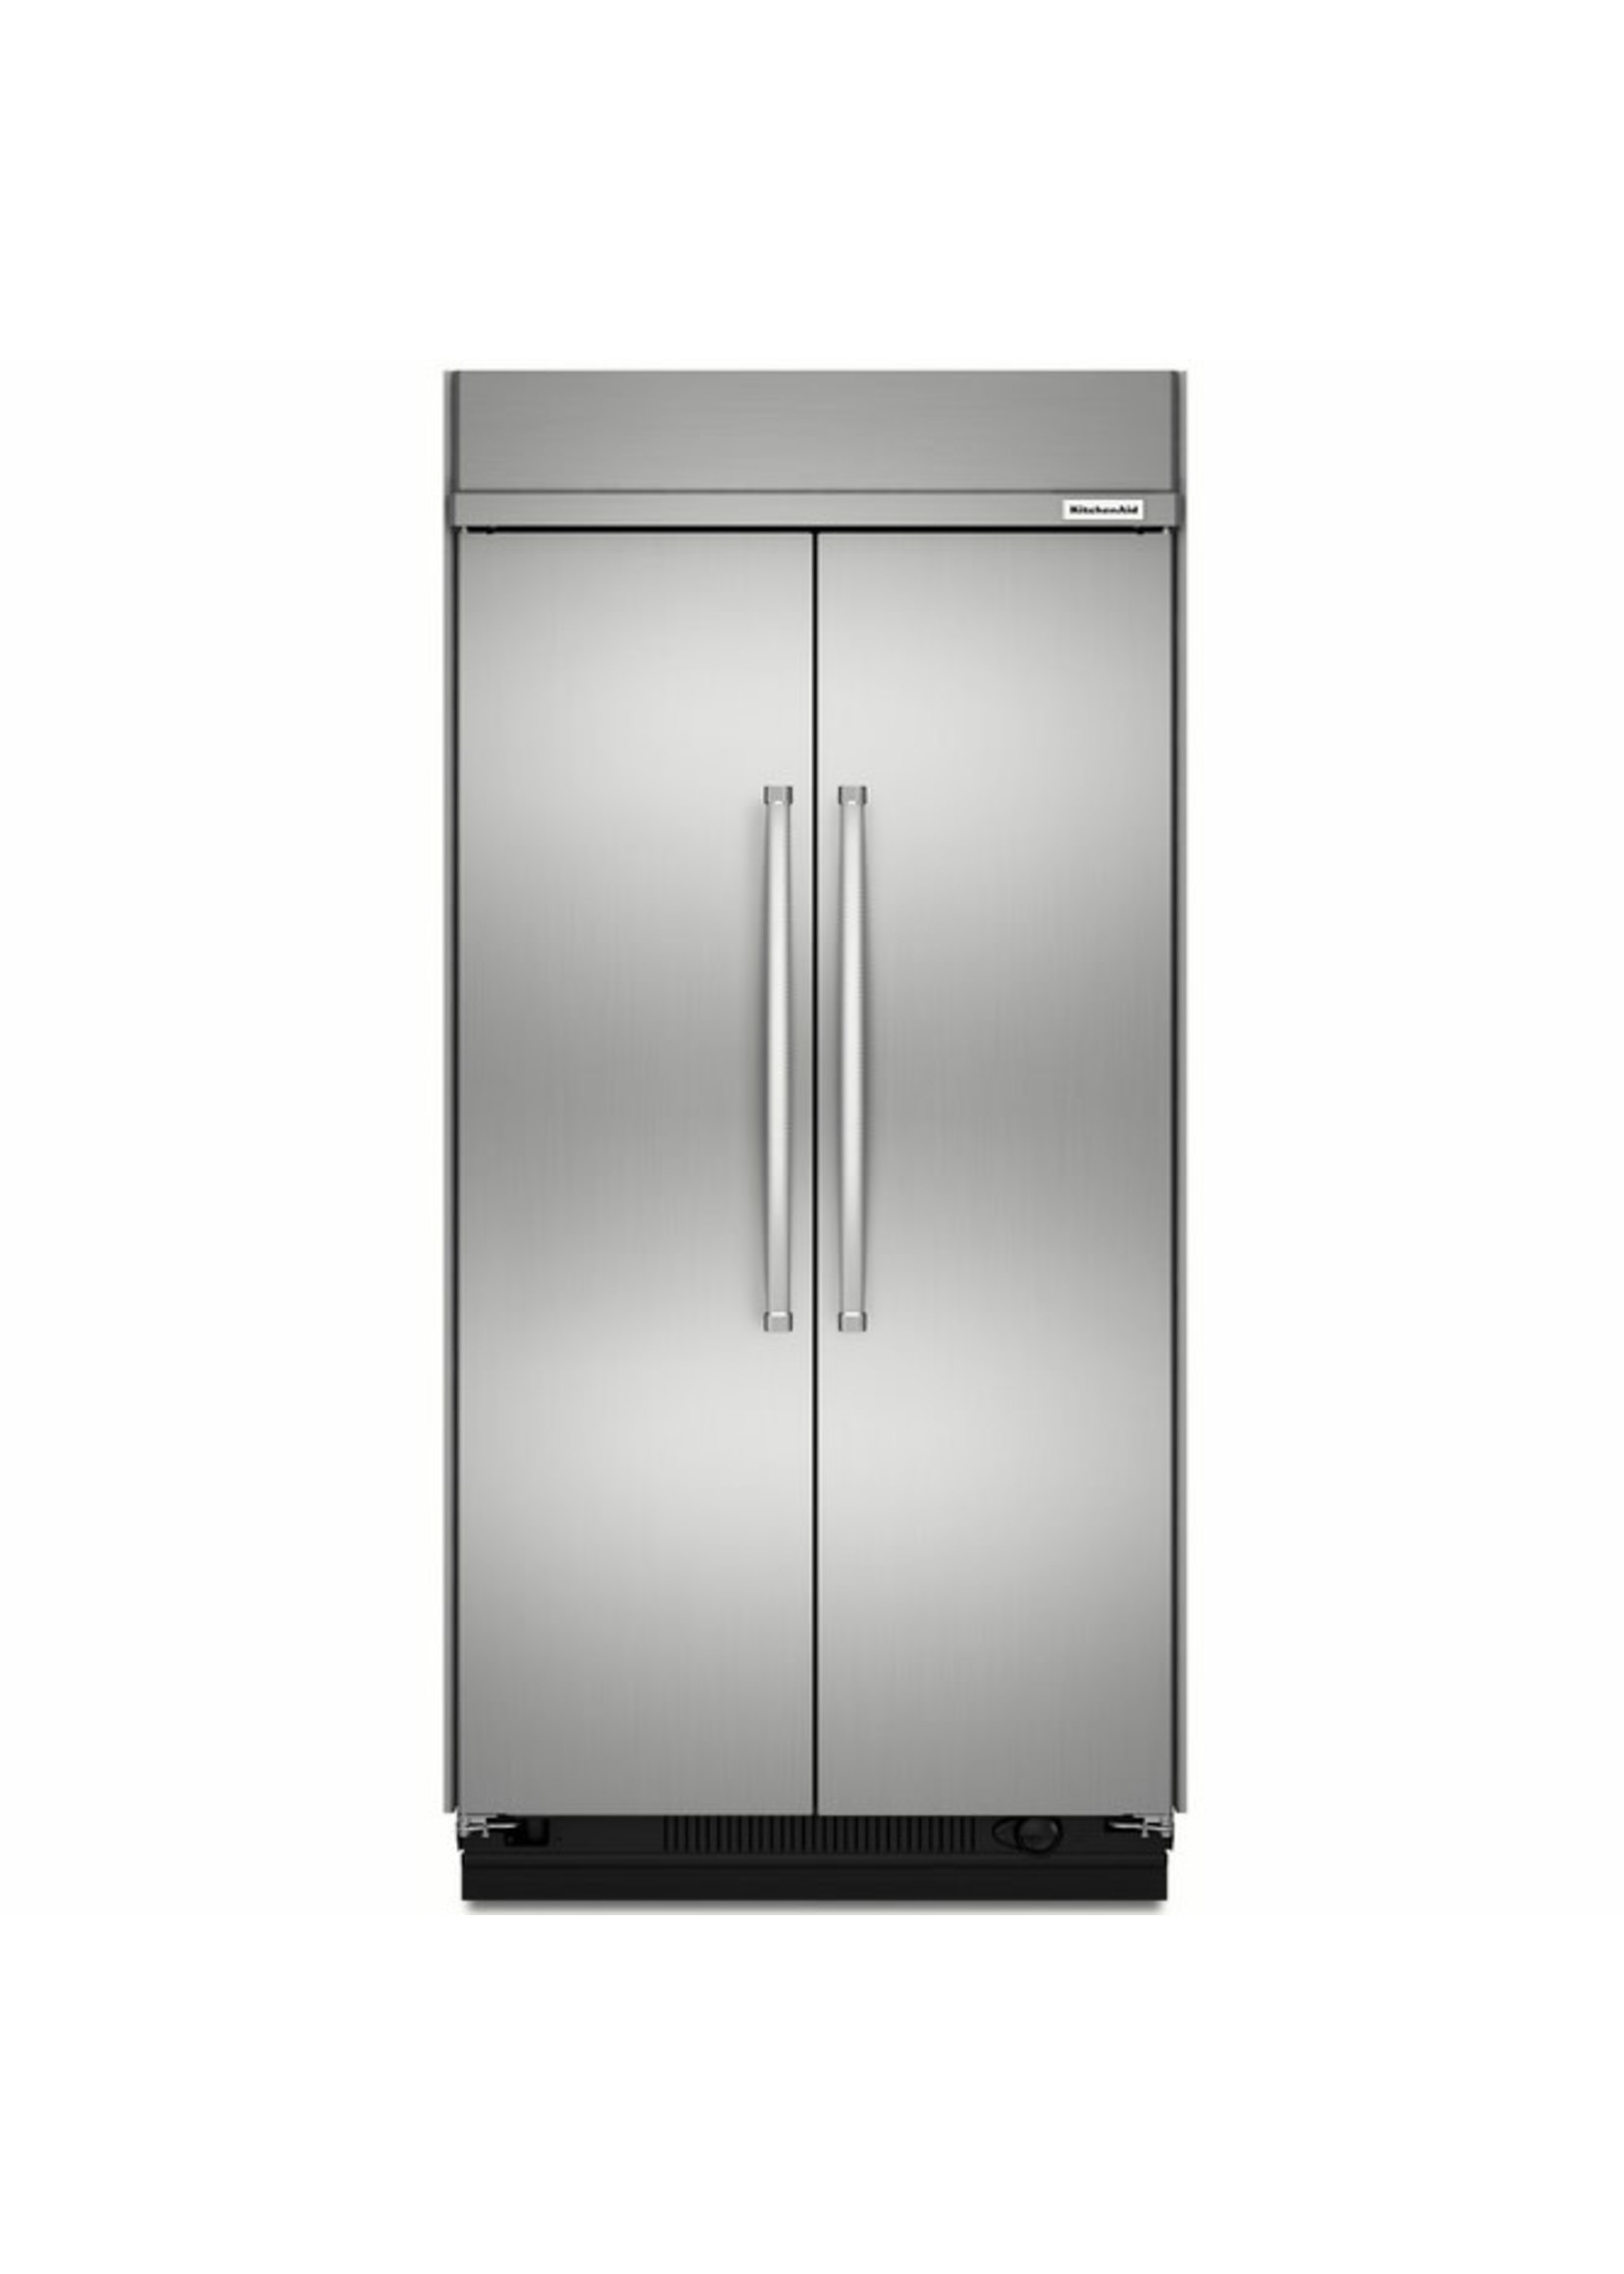 KITCHEN AID KitchenAid  48" Built-In Side-by-Side Refrigerator with Automatic Ice Maker